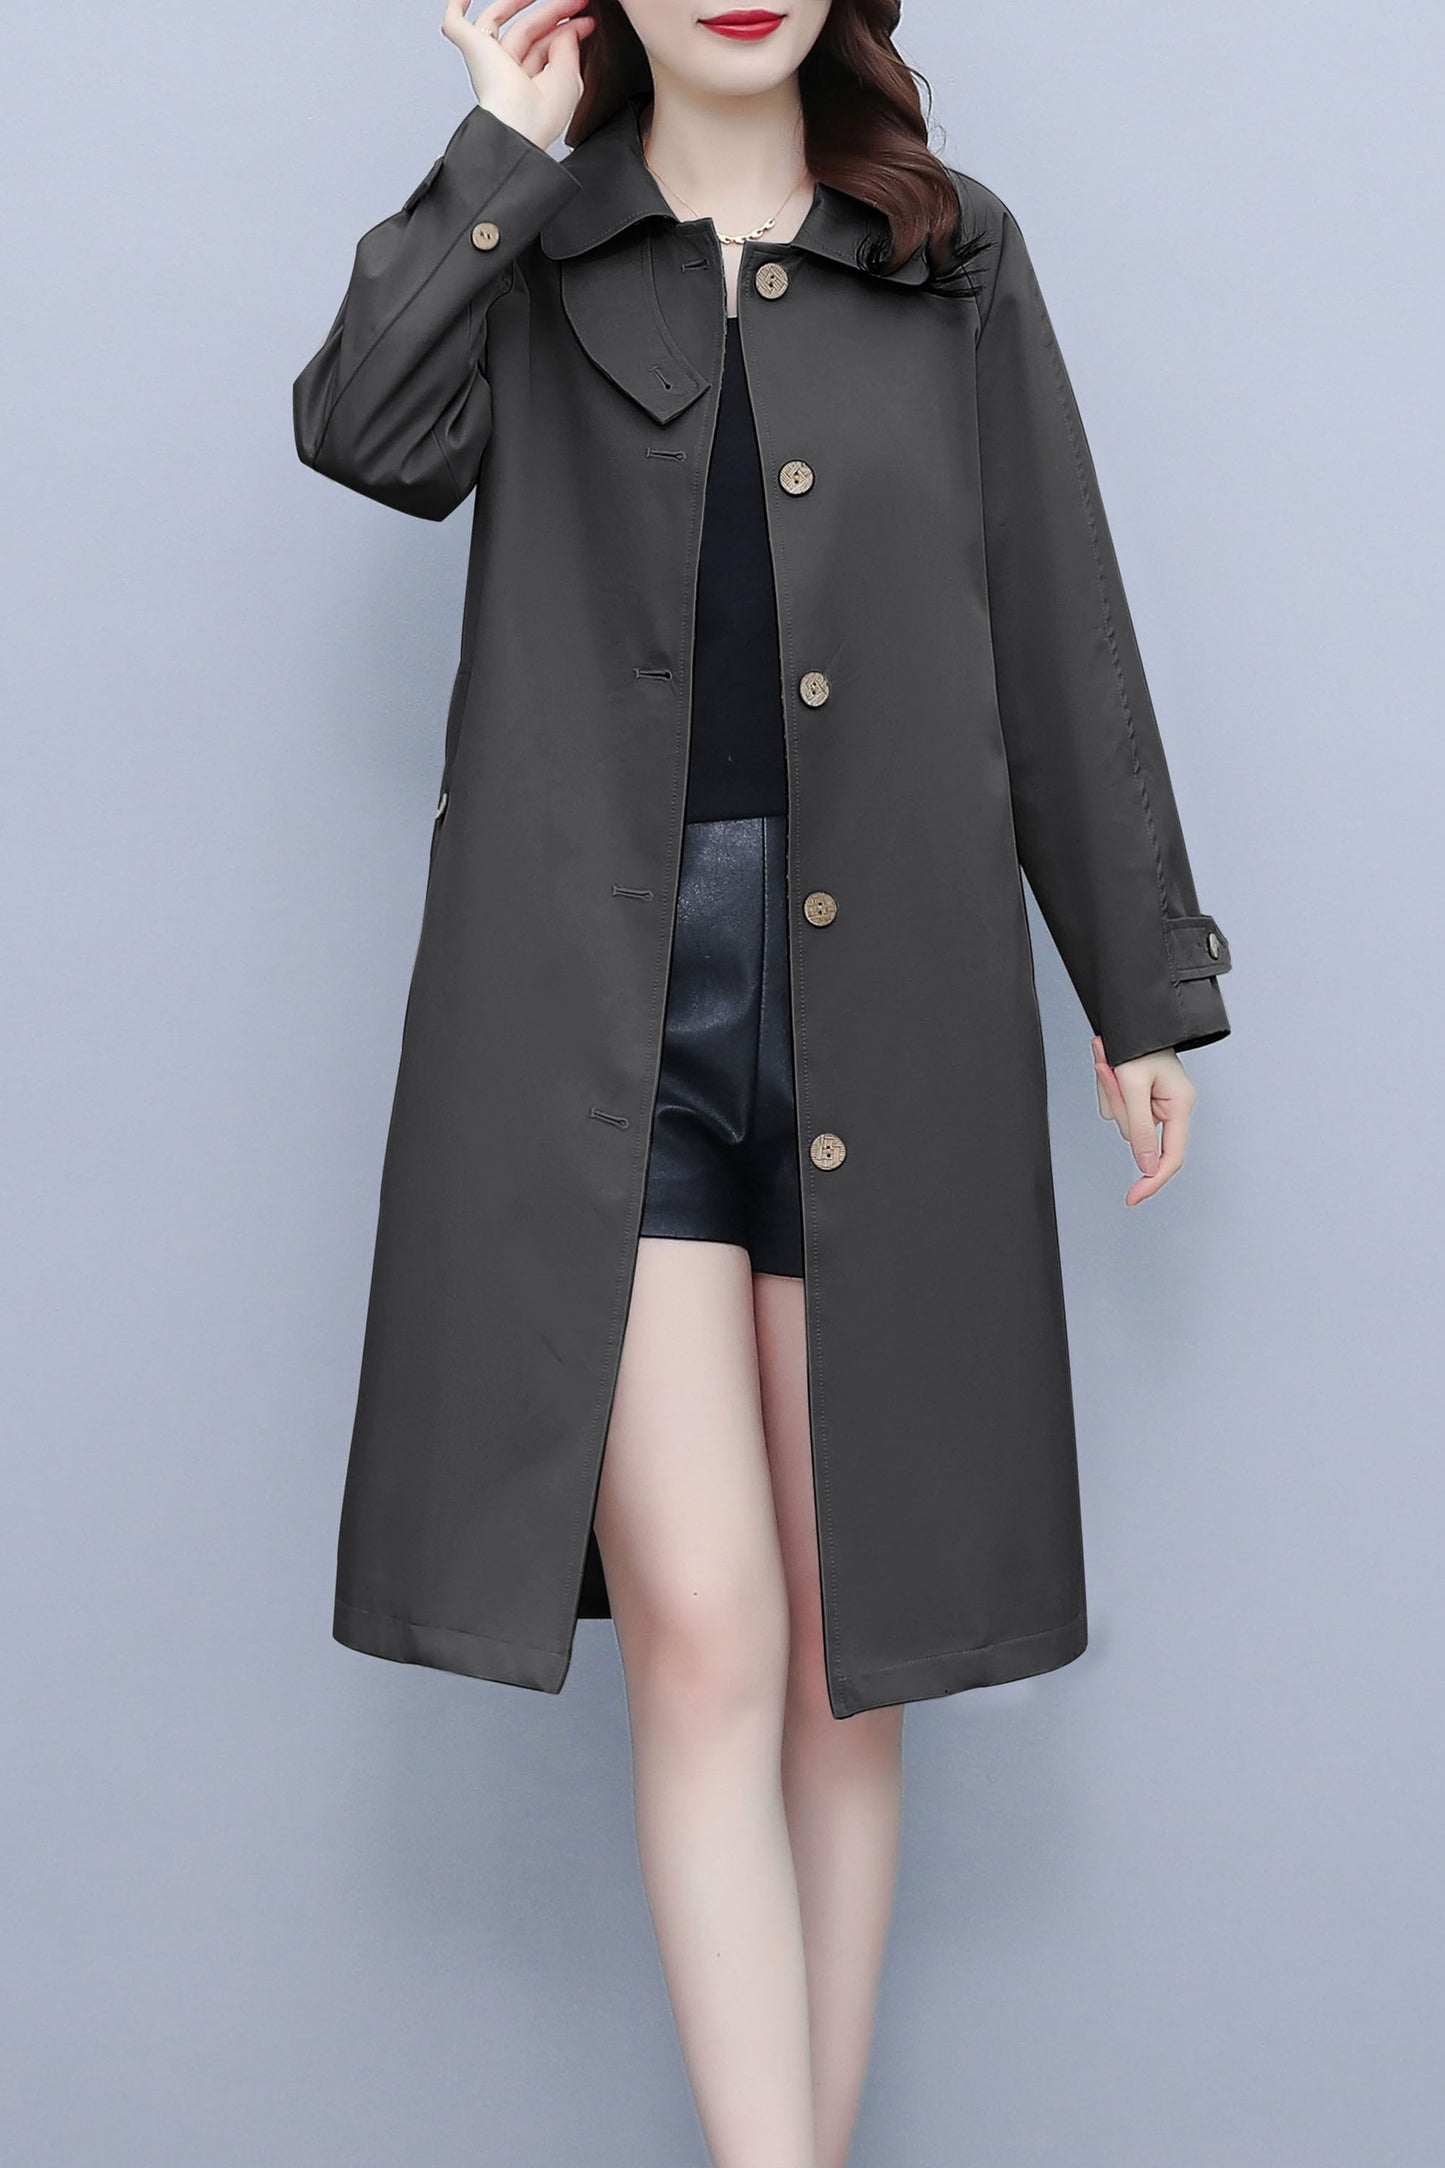 Dark Grey 3/4 Length Outerwear Trench Coat